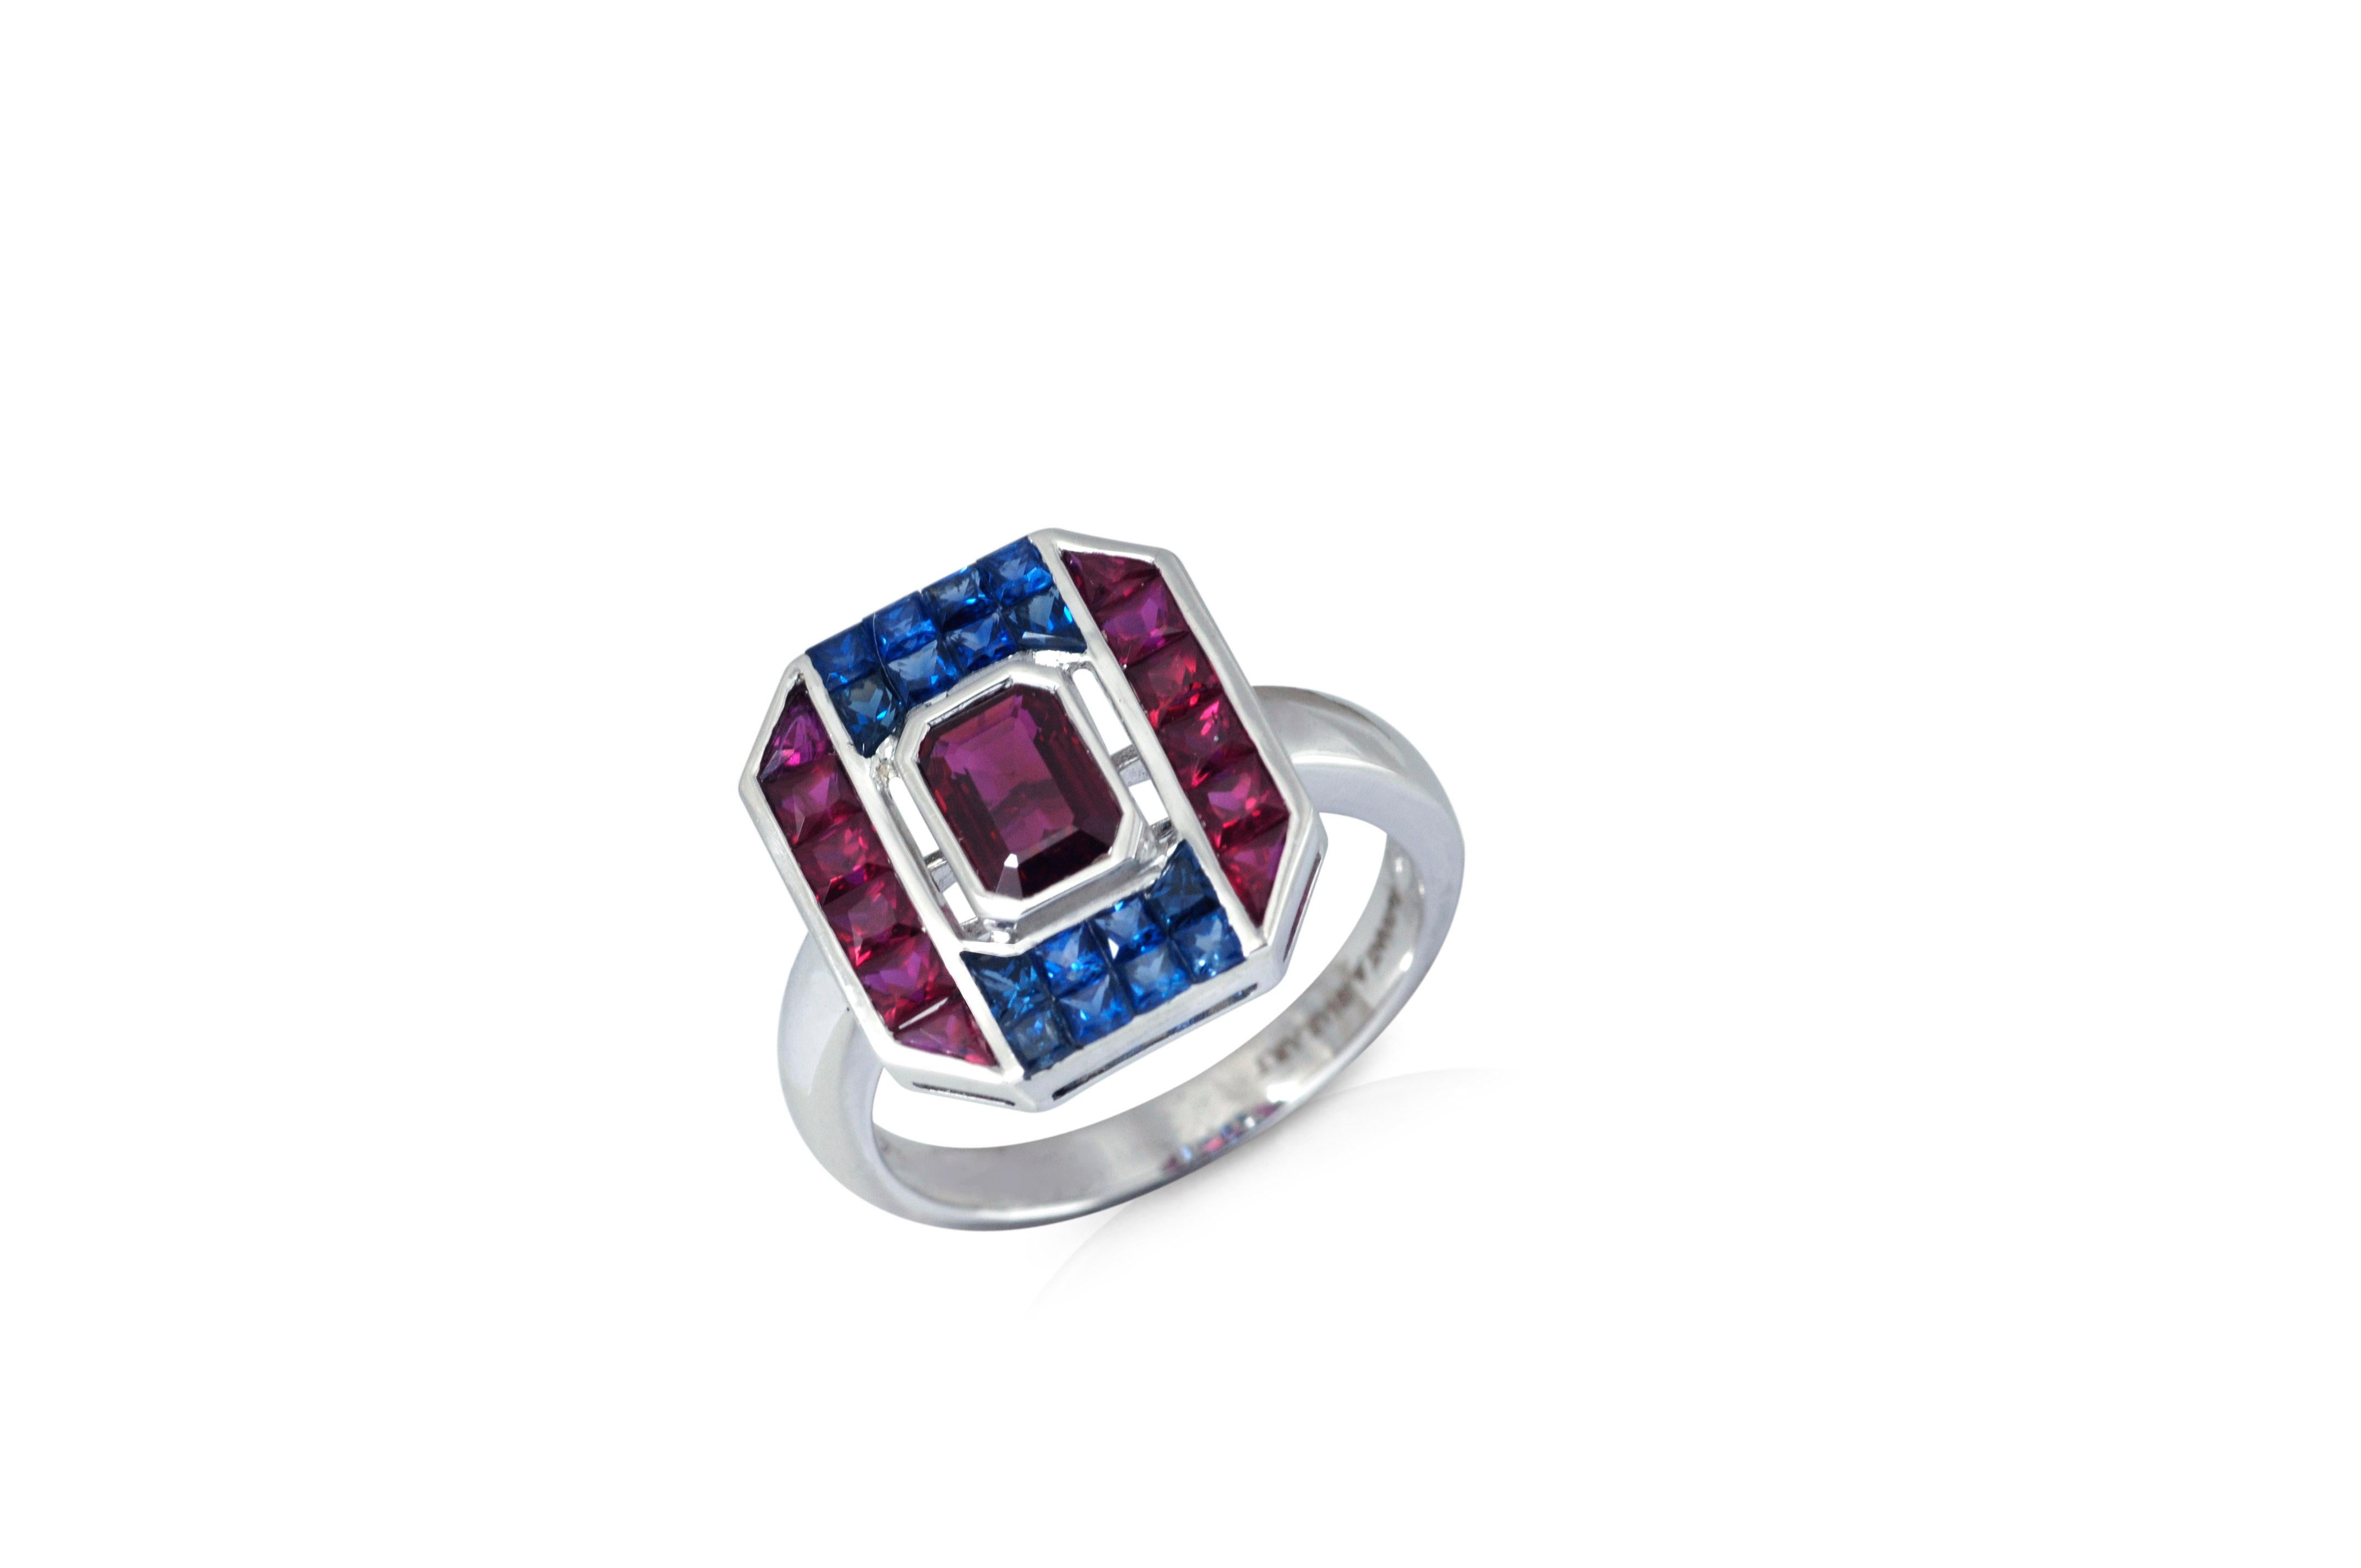 Ruby 1.48 carats with Blue Sapphire 0.66 carat and Ruby 0.73 carat Ring set in 18 Karat White Gold Settings

Width:  1.4 cm 
Length:  1.5 cm
Ring Size: 53
Total Weight: 5.91 grams

